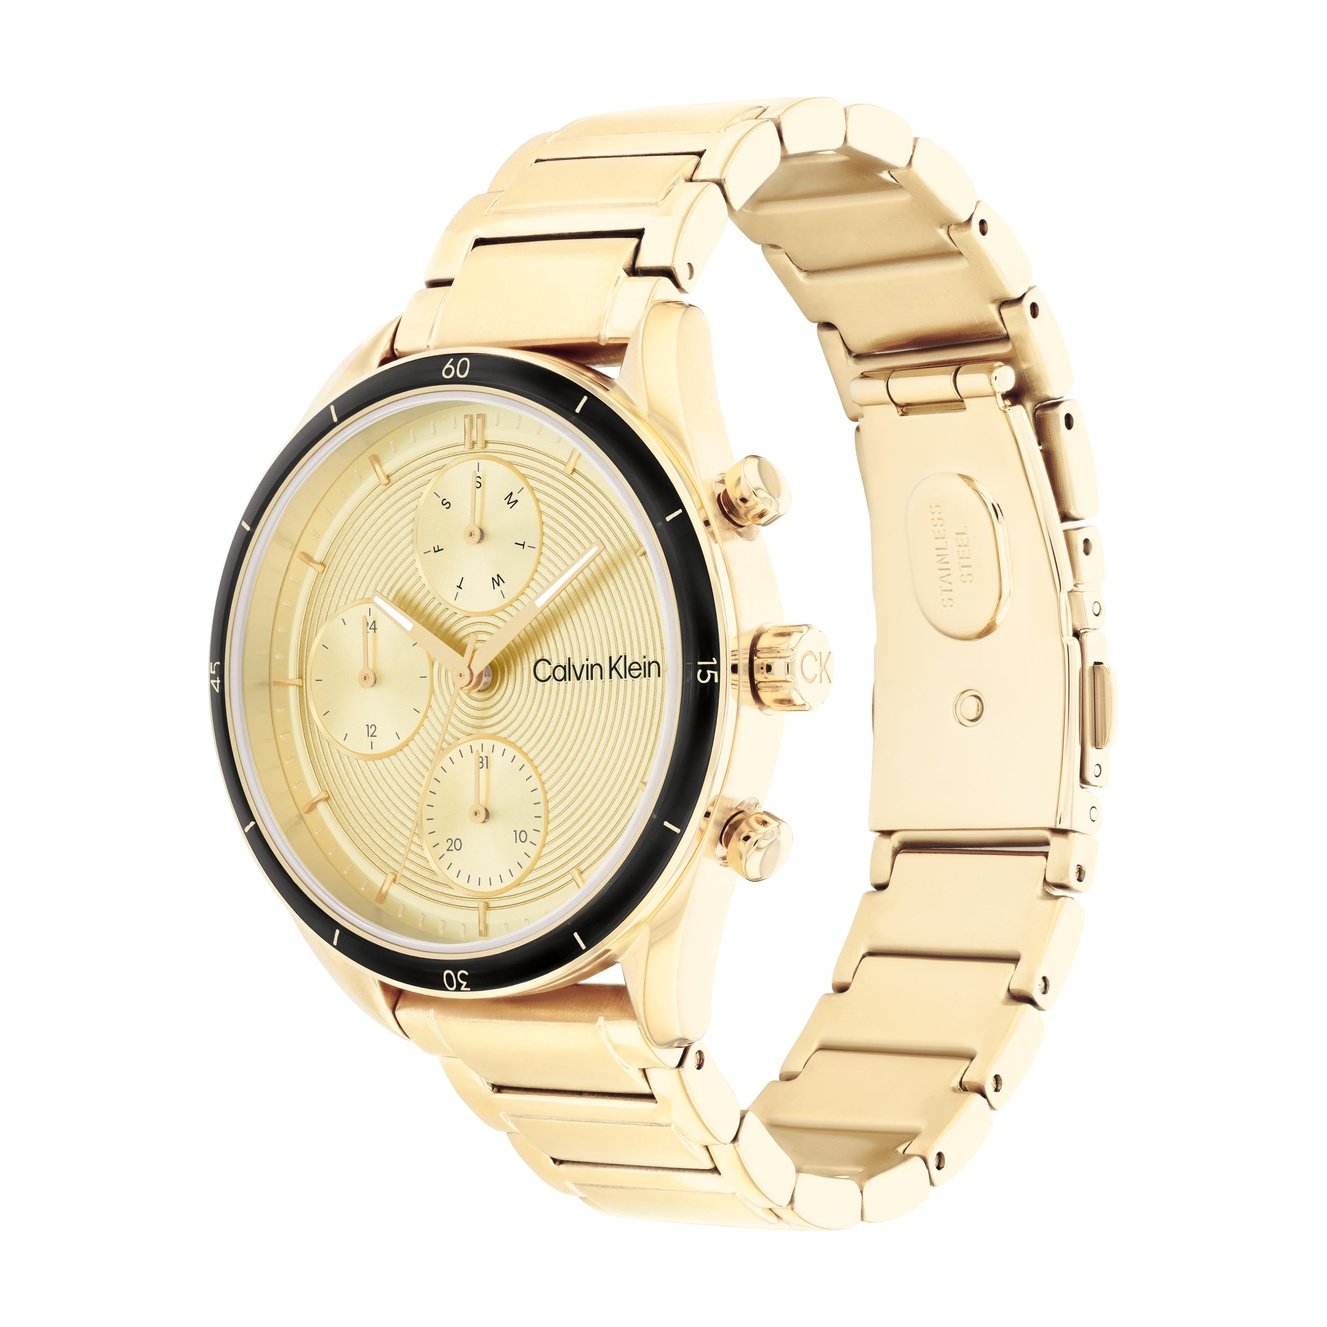 Multi-Function Sport Her (25200173) Watch For Ladies